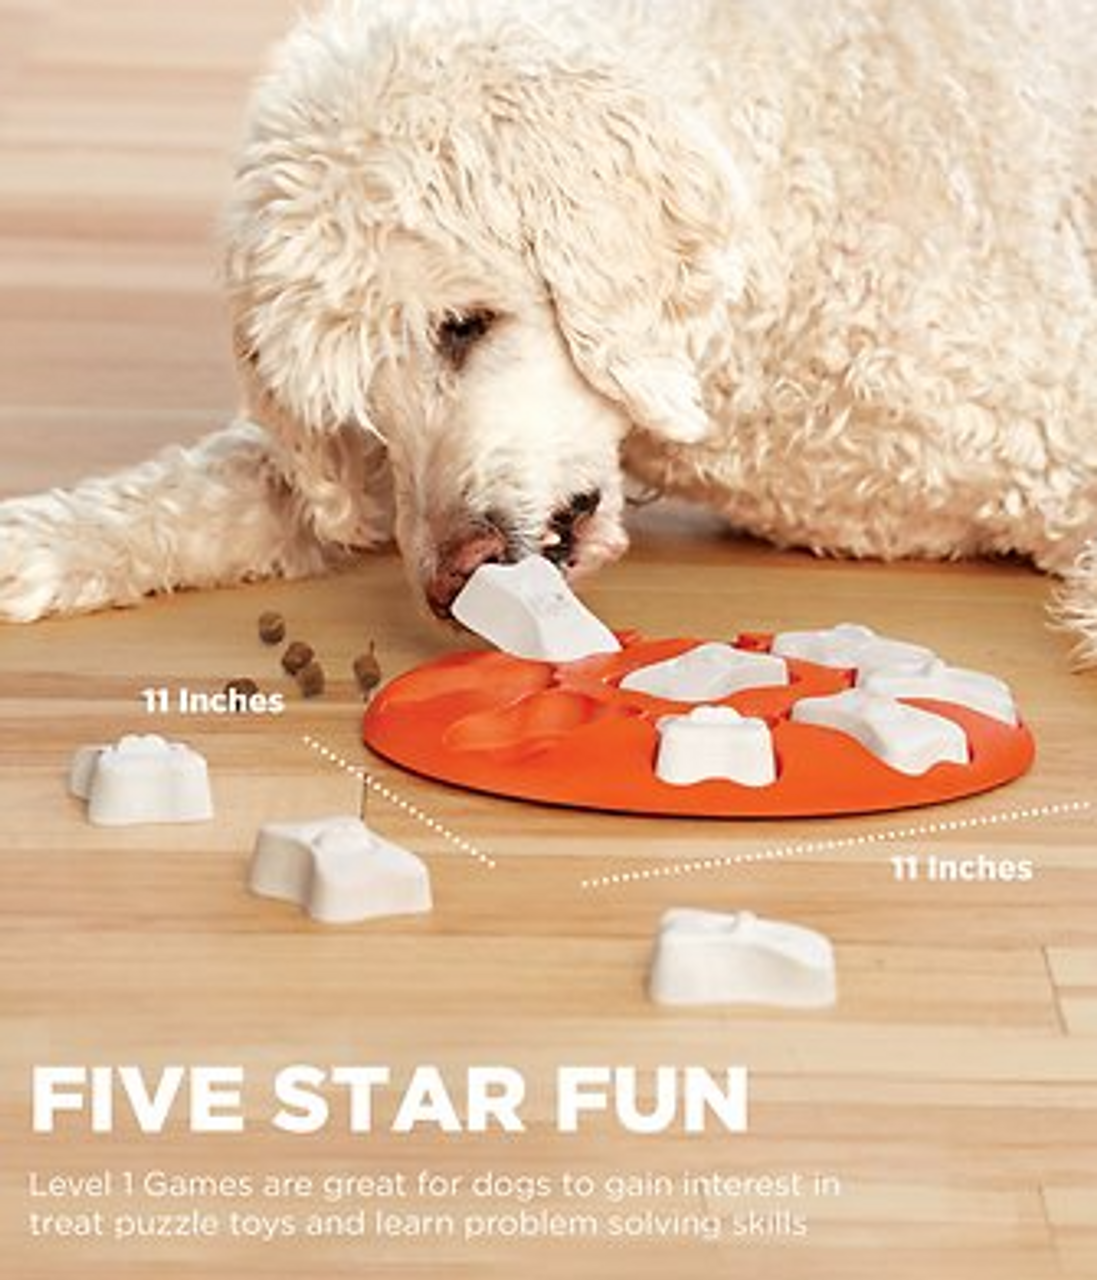 https://cdn11.bigcommerce.com/s-xfu1s3ki5p/images/stencil/1280x1280/products/13937/7283/Outward_Hound_Smart_Dog_Bone_Puzzle_Game_Dog_Toy55302_2__61686.1636578038.PNG?c=1